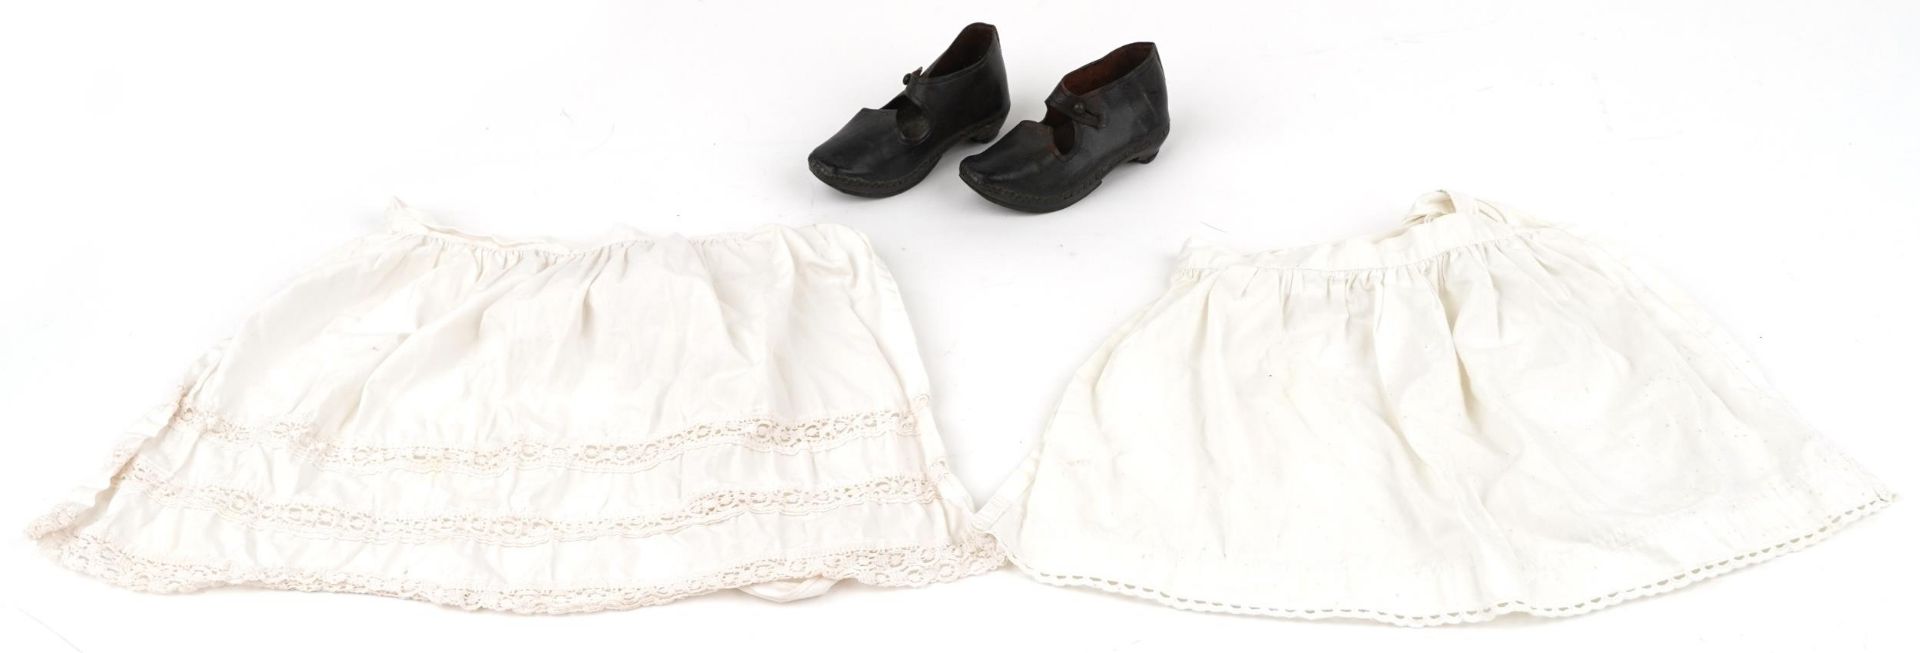 Pair of Victorian leather child's shoes and two aprons